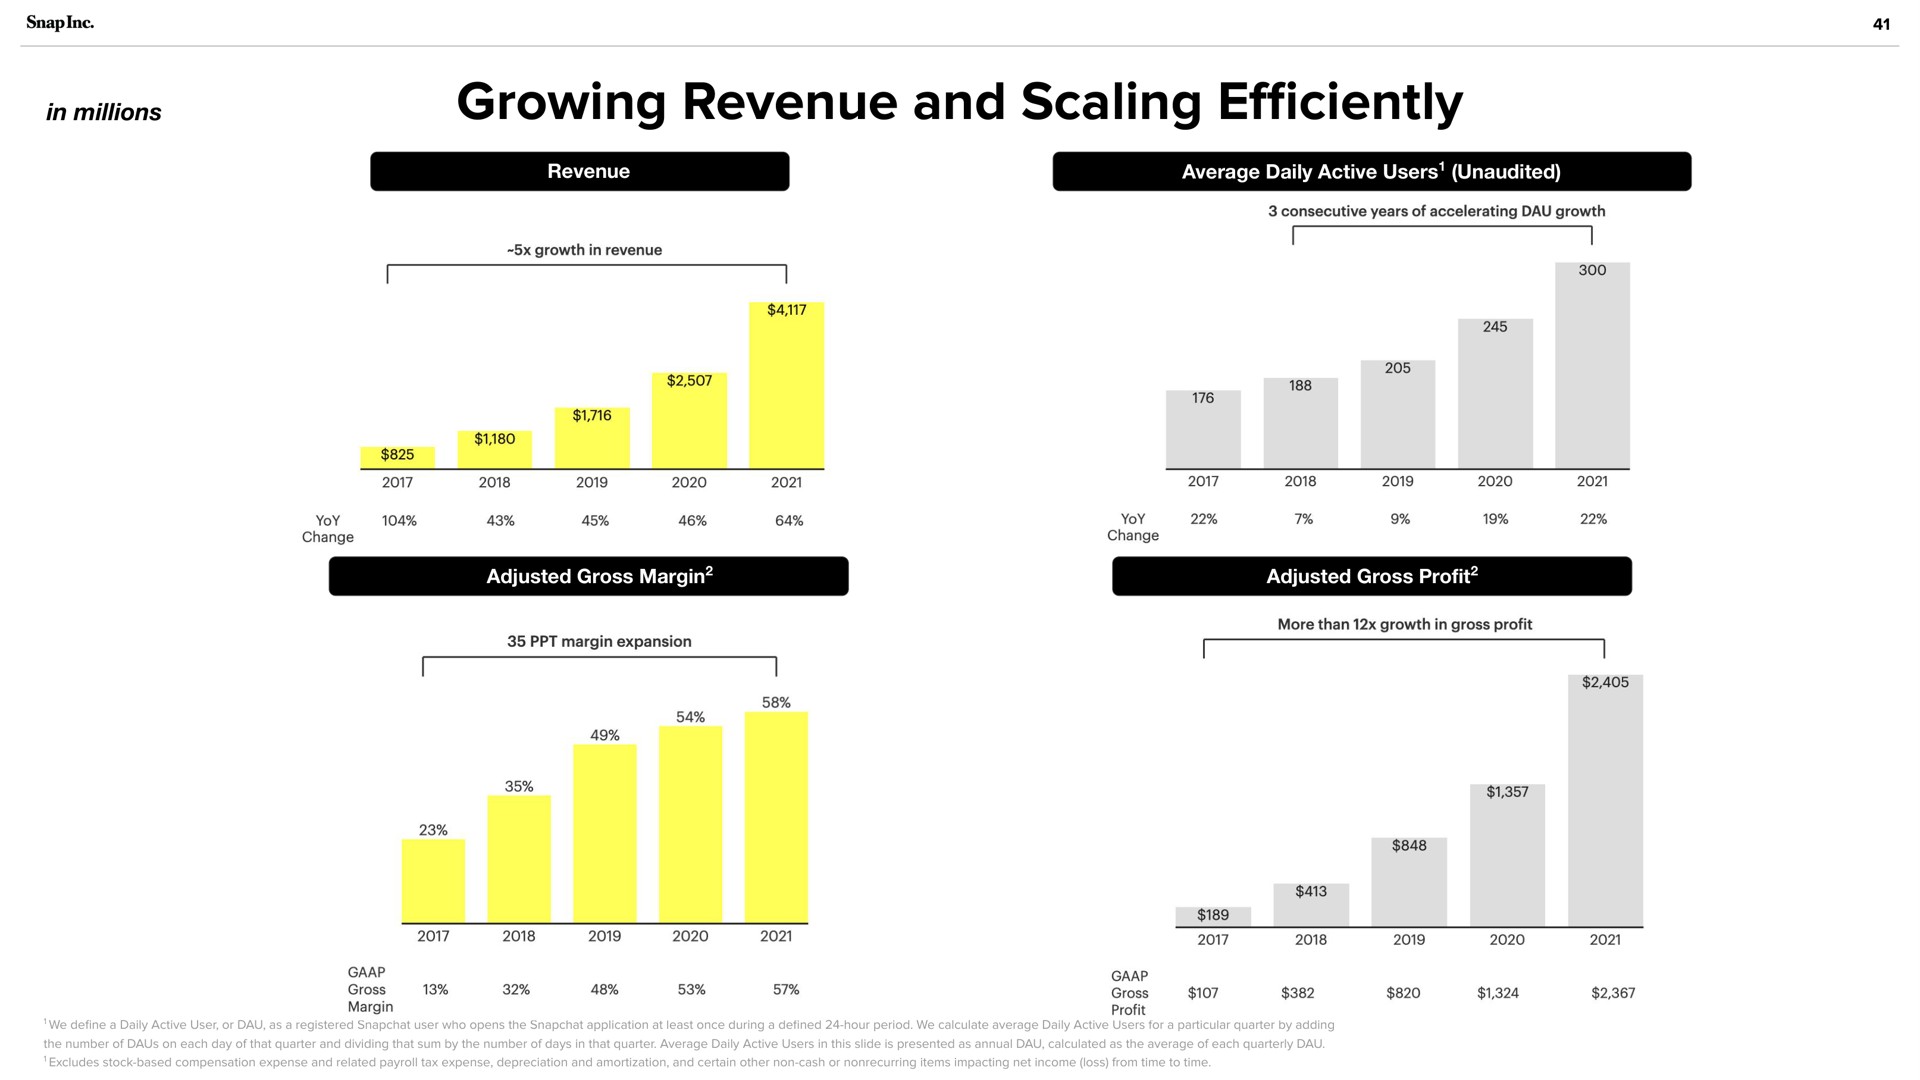 growing revenue and scaling in millions efficiently | Snap Inc